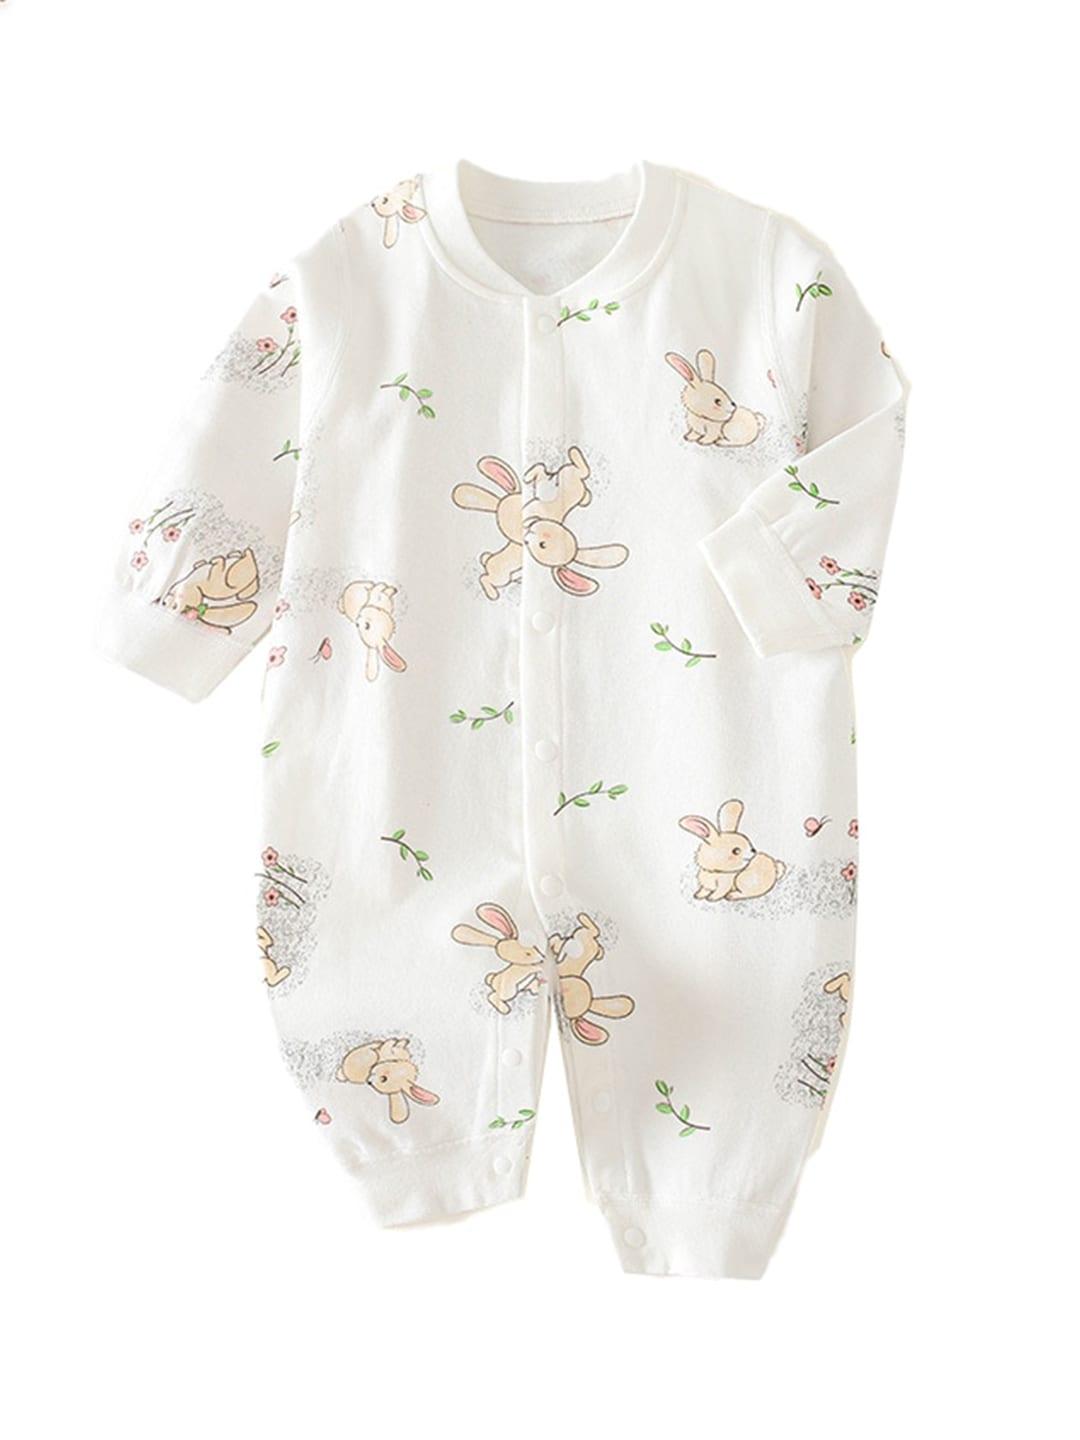 stylecast-infants-printed-cotton-rompers